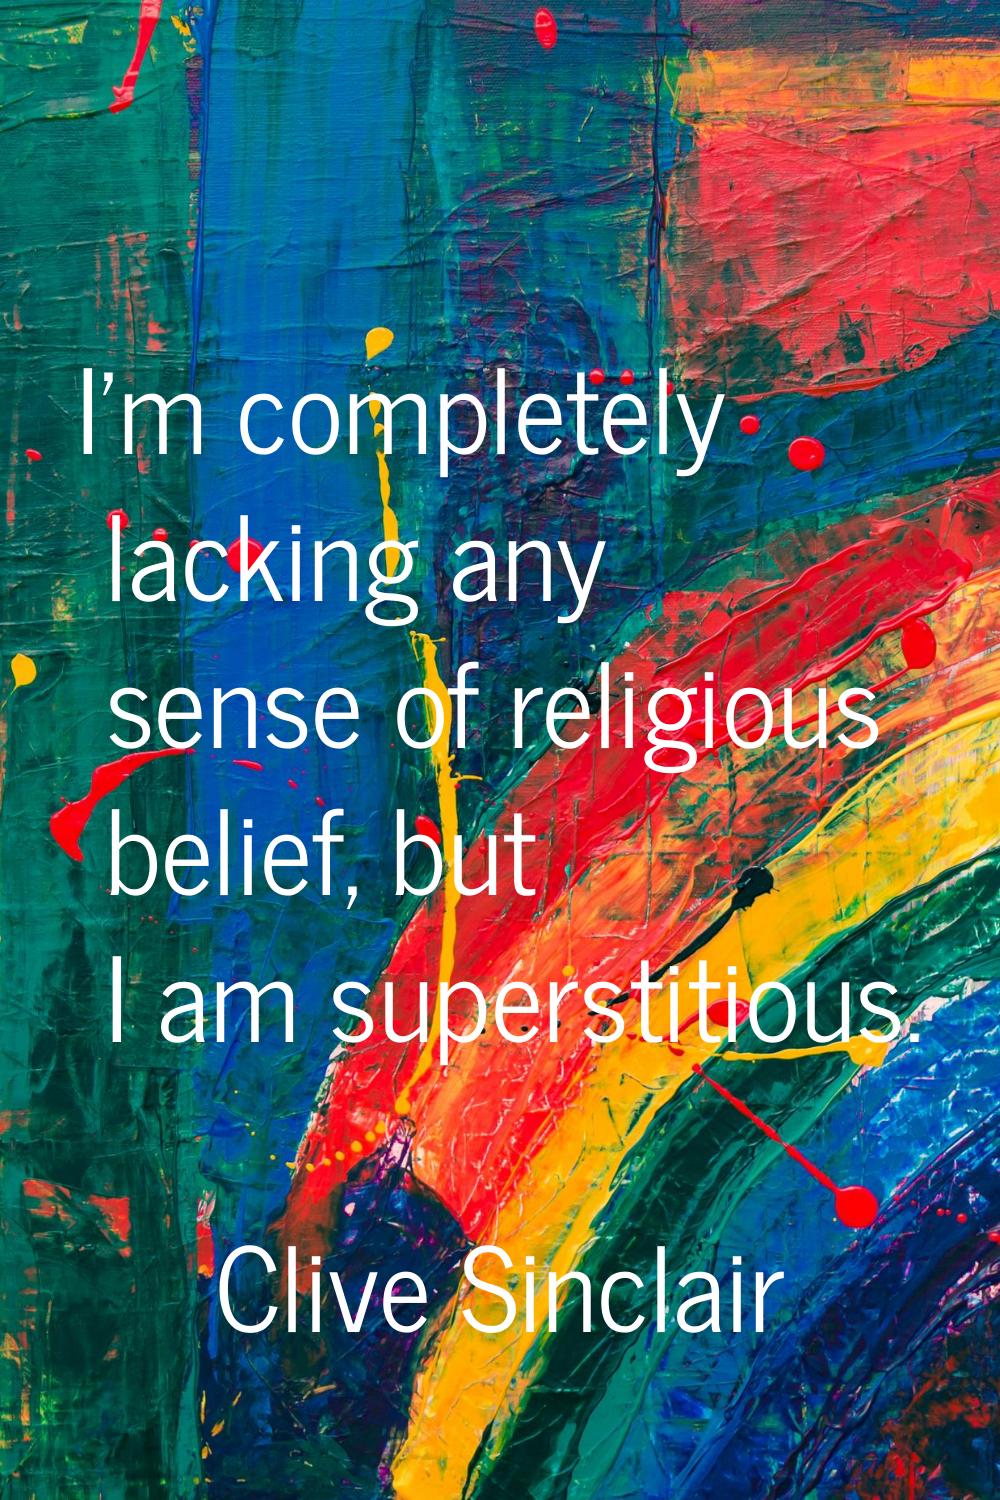 I'm completely lacking any sense of religious belief, but I am superstitious.